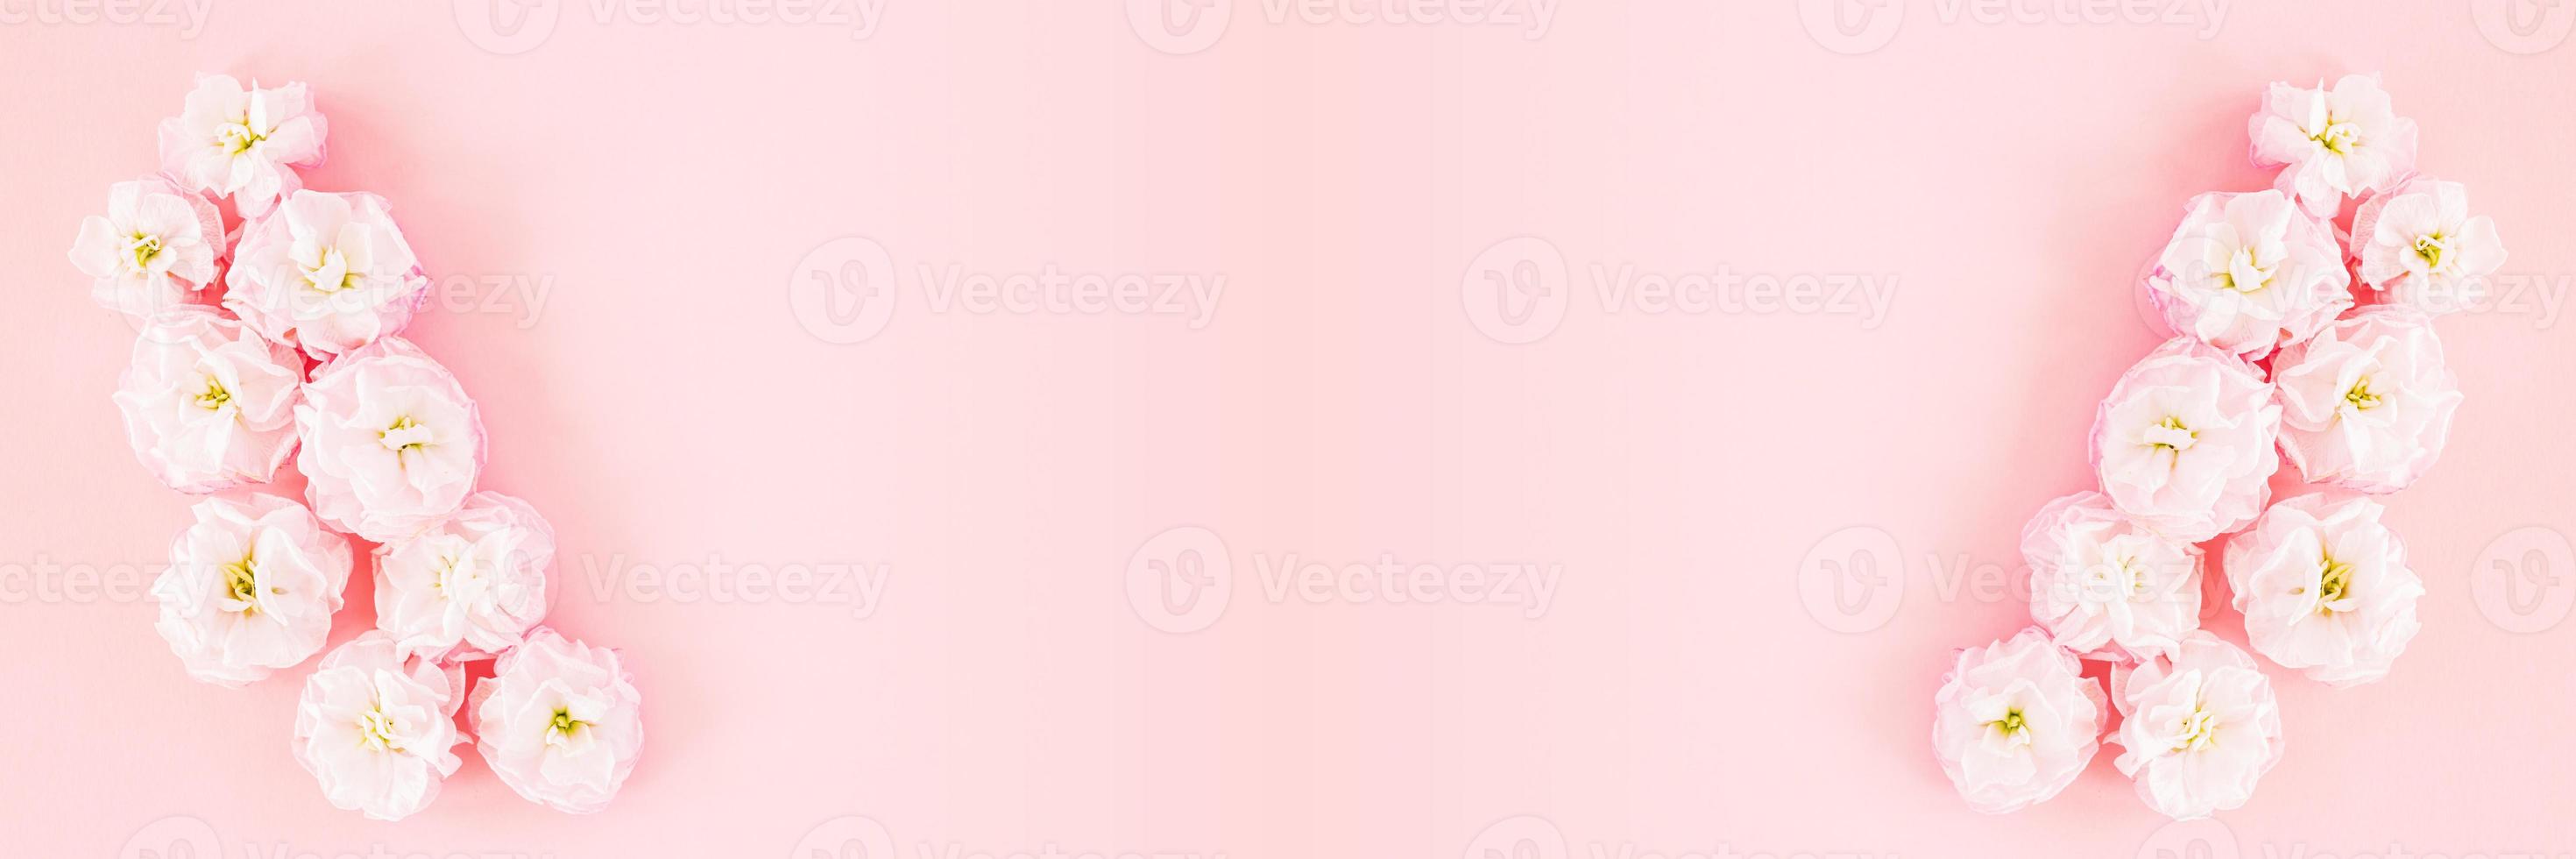 Banner or greeting card with copy space made of pink matthiola flowers on pastel background. photo